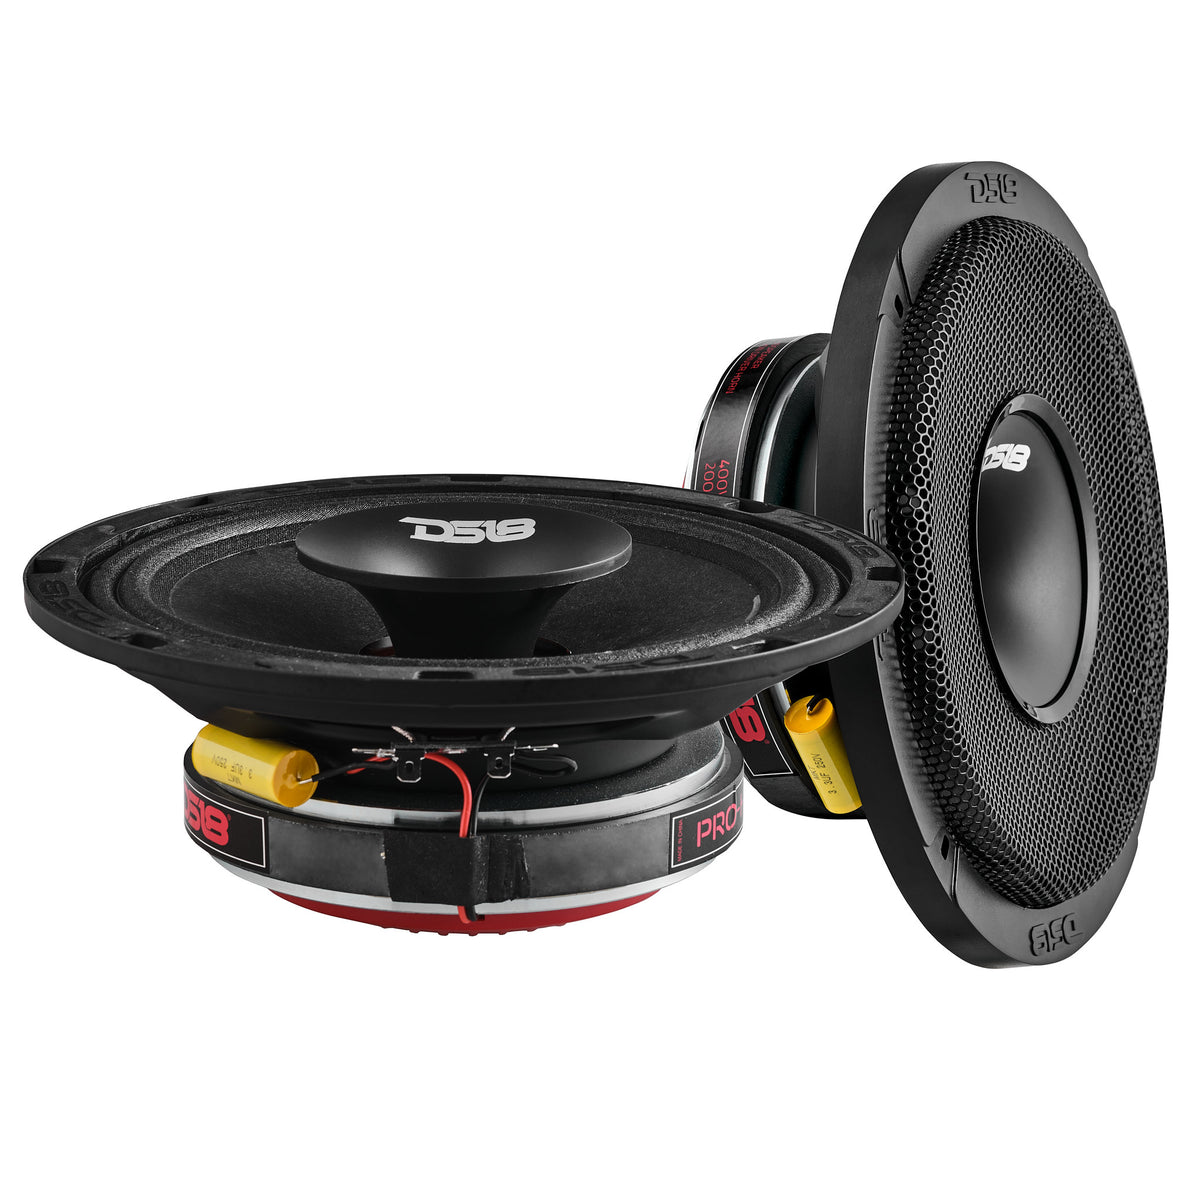 PRO 8" Shallow Coaxial Hybrid Mid-Range Loudspeaker with Built-in Driver 200 Watts Rms 4-Ohm - Grill Included